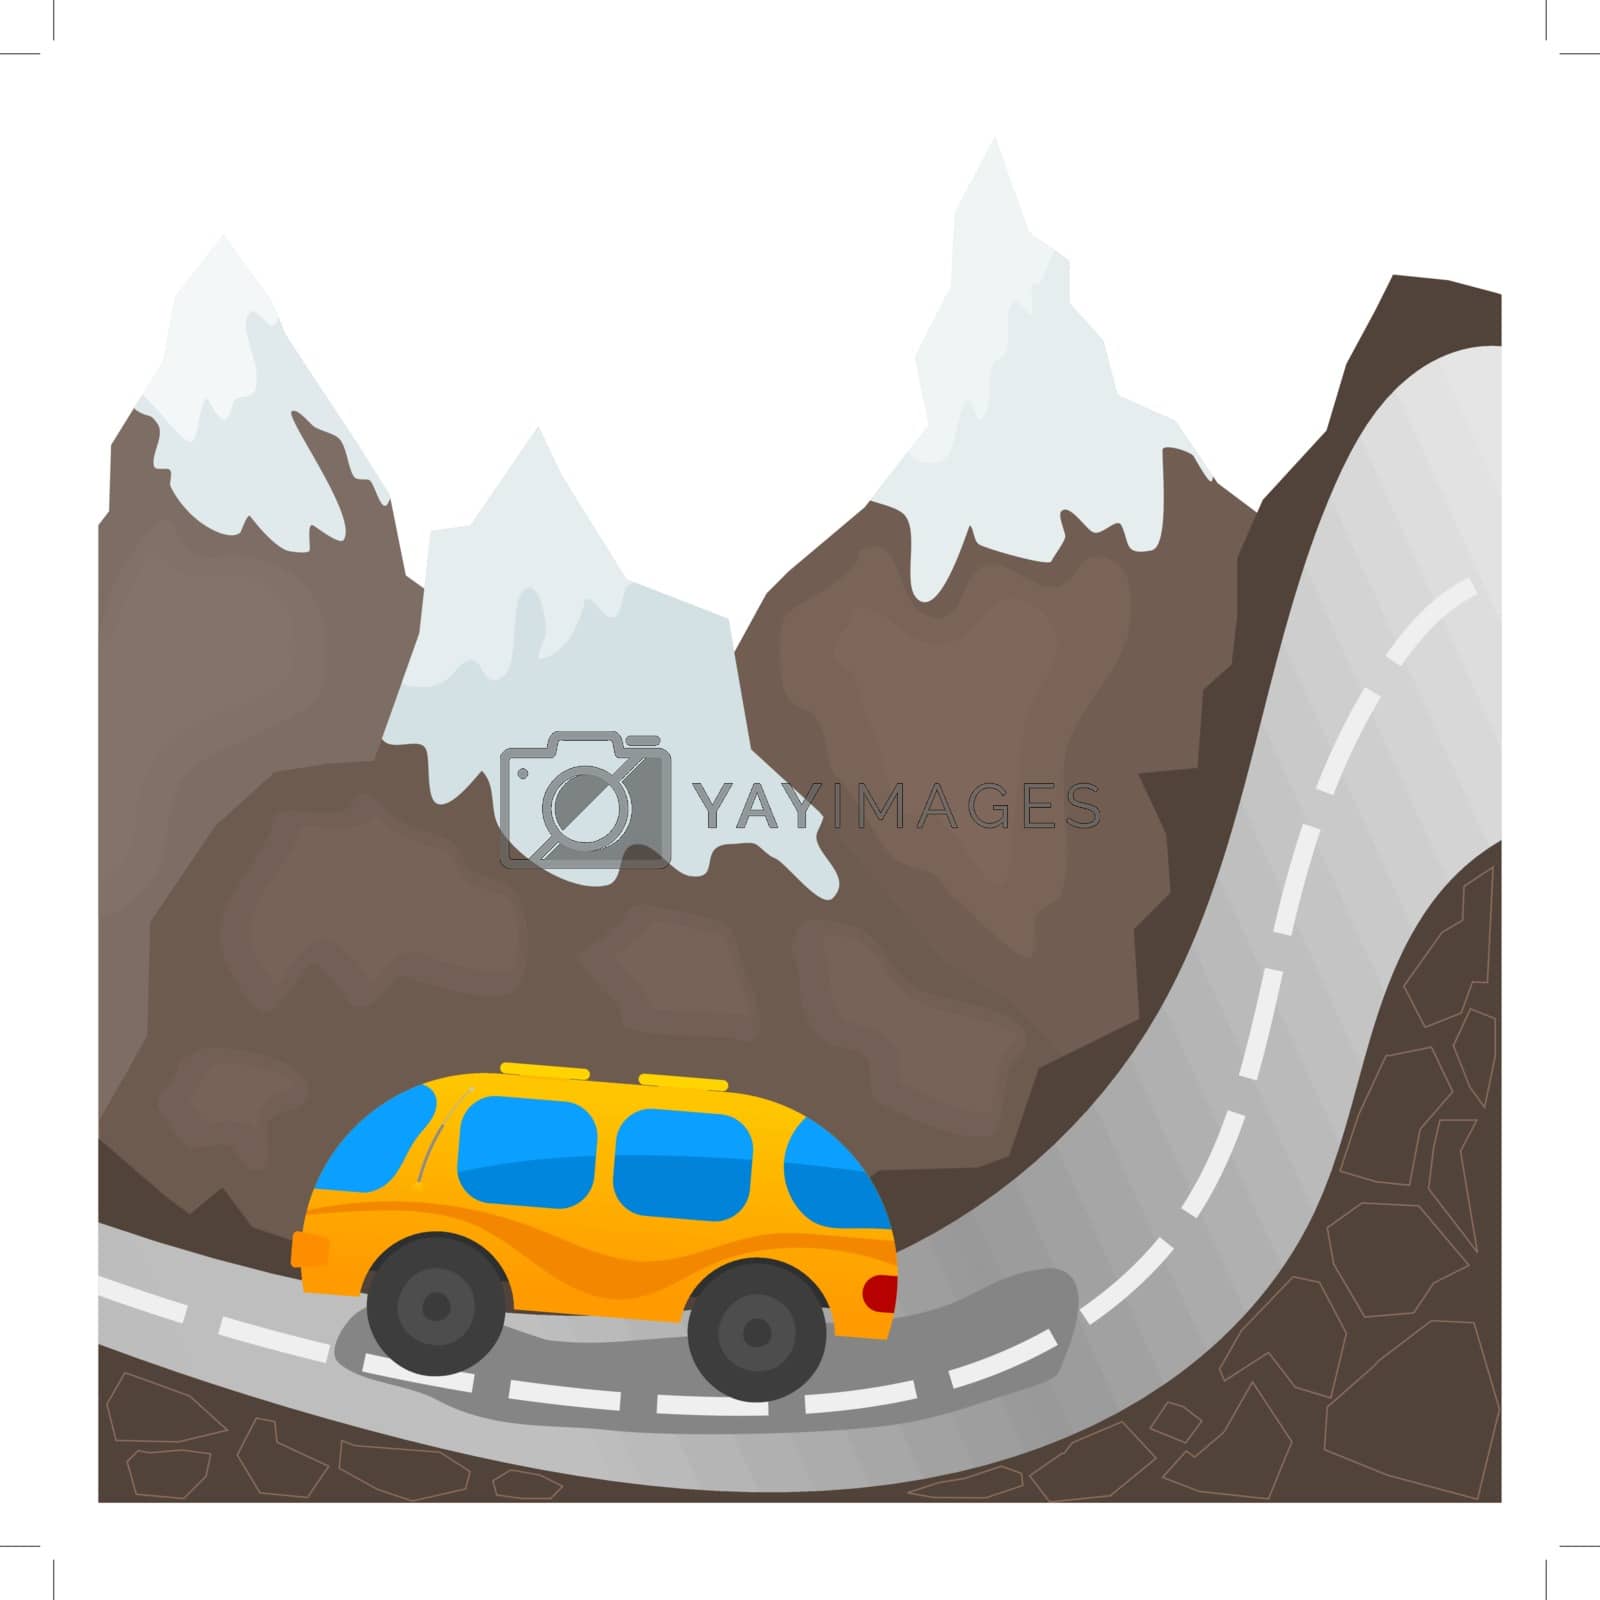 Royalty free image of Cartoon bus on a mountain road by Larser